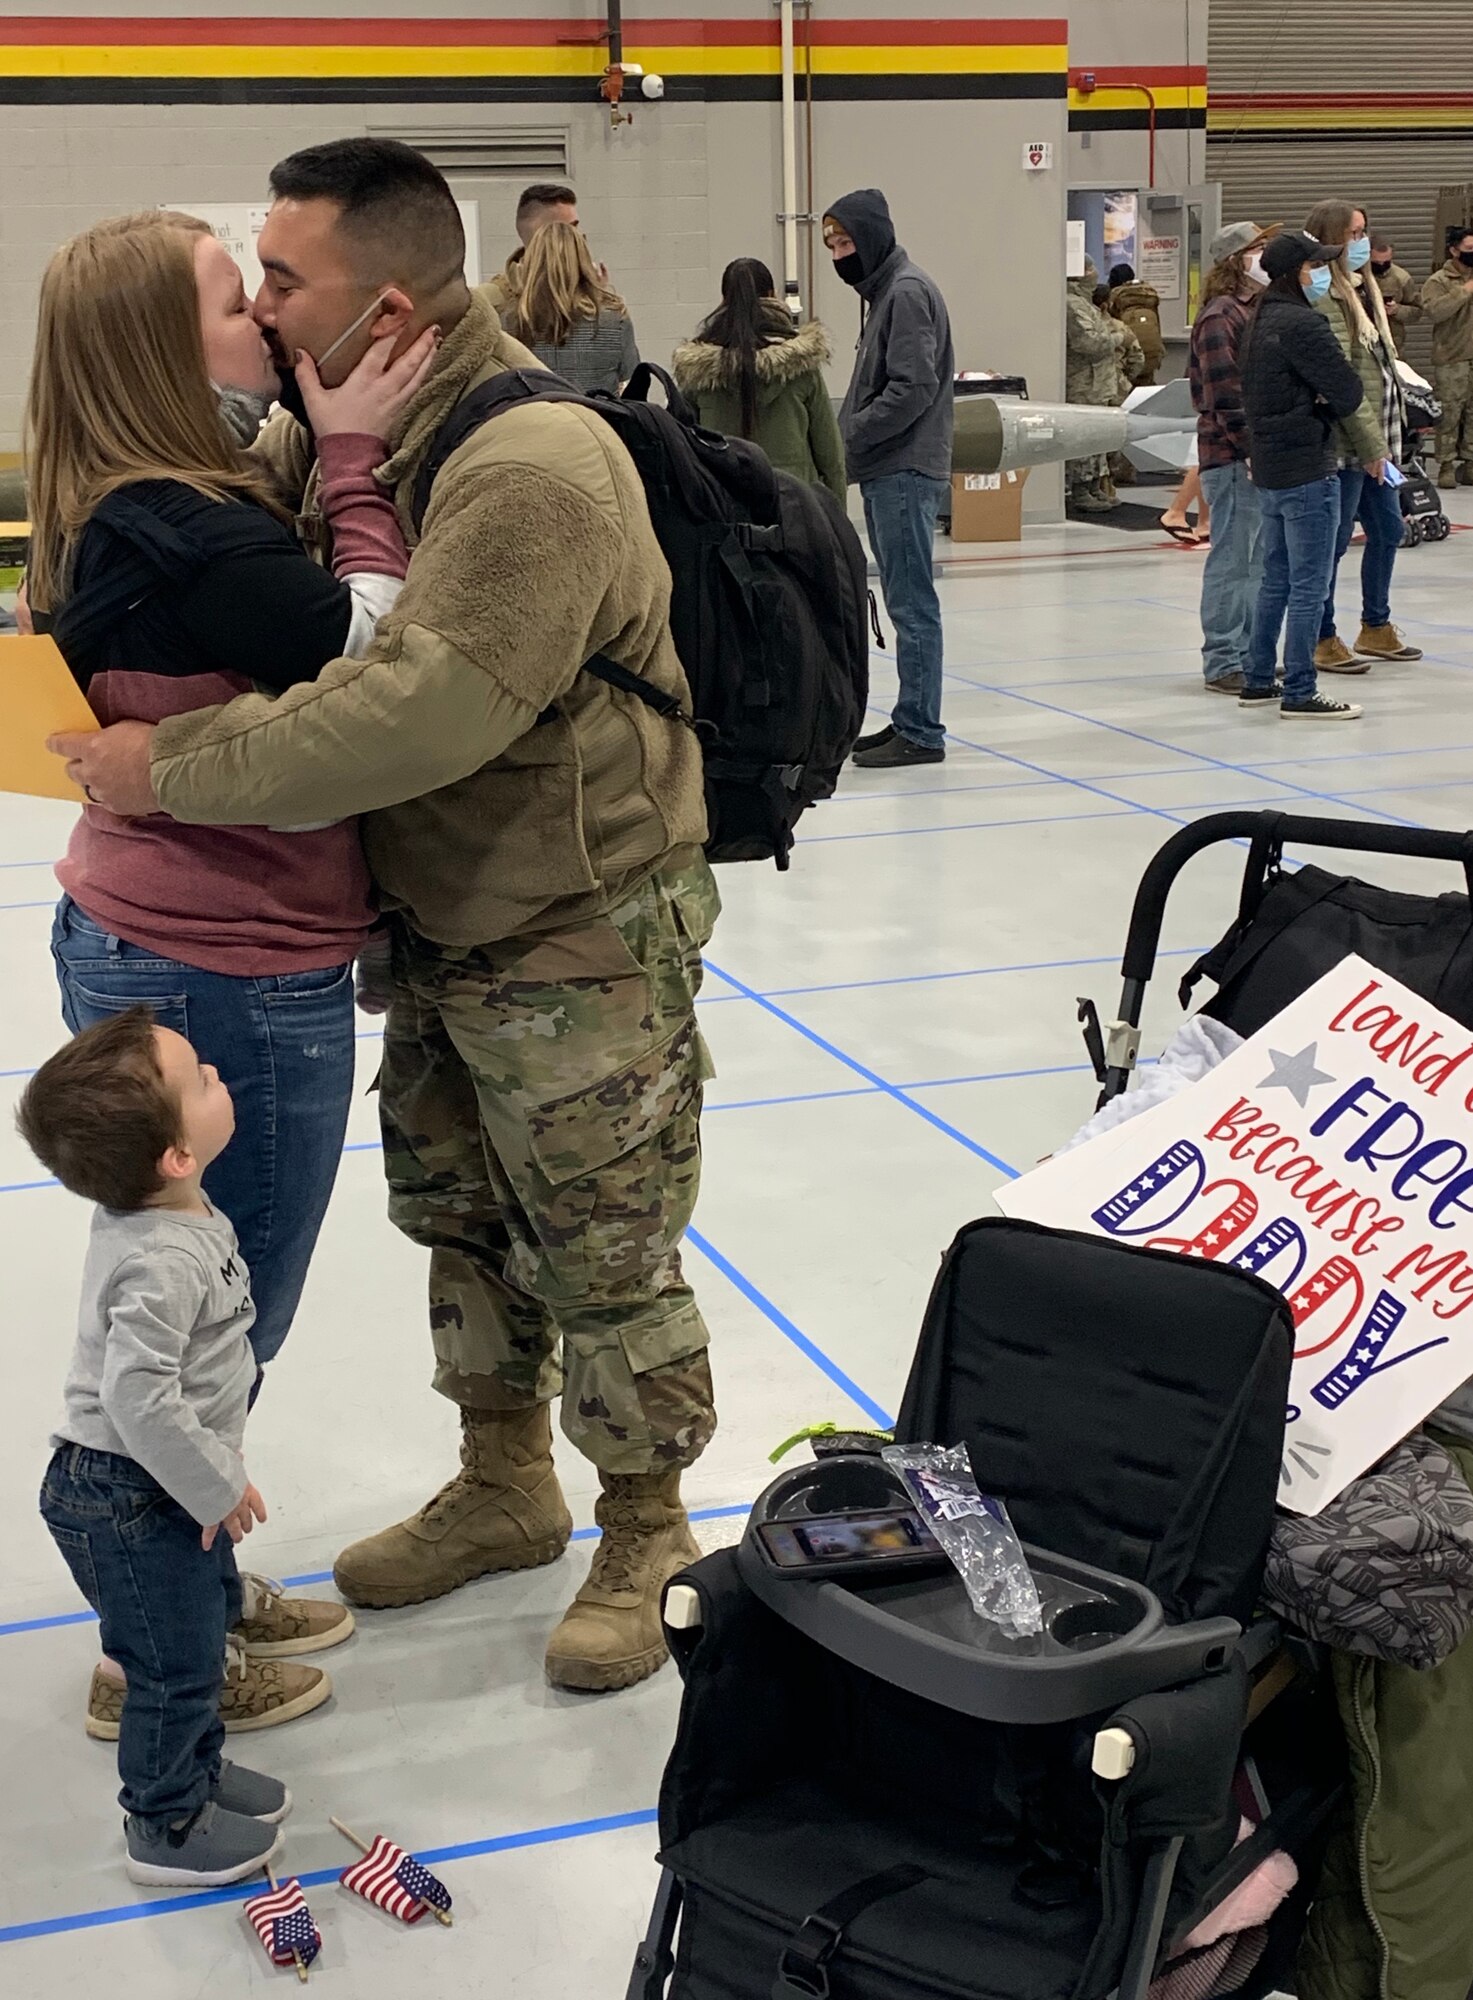 Staff Sgt. Jevon Rondeau and his wife, Sydney, share a kiss as their two-year-old son Dawson looks on. Jevon arrived home Sunday following a deployment to Al Dhafra Air Base, United Arab Emirates.